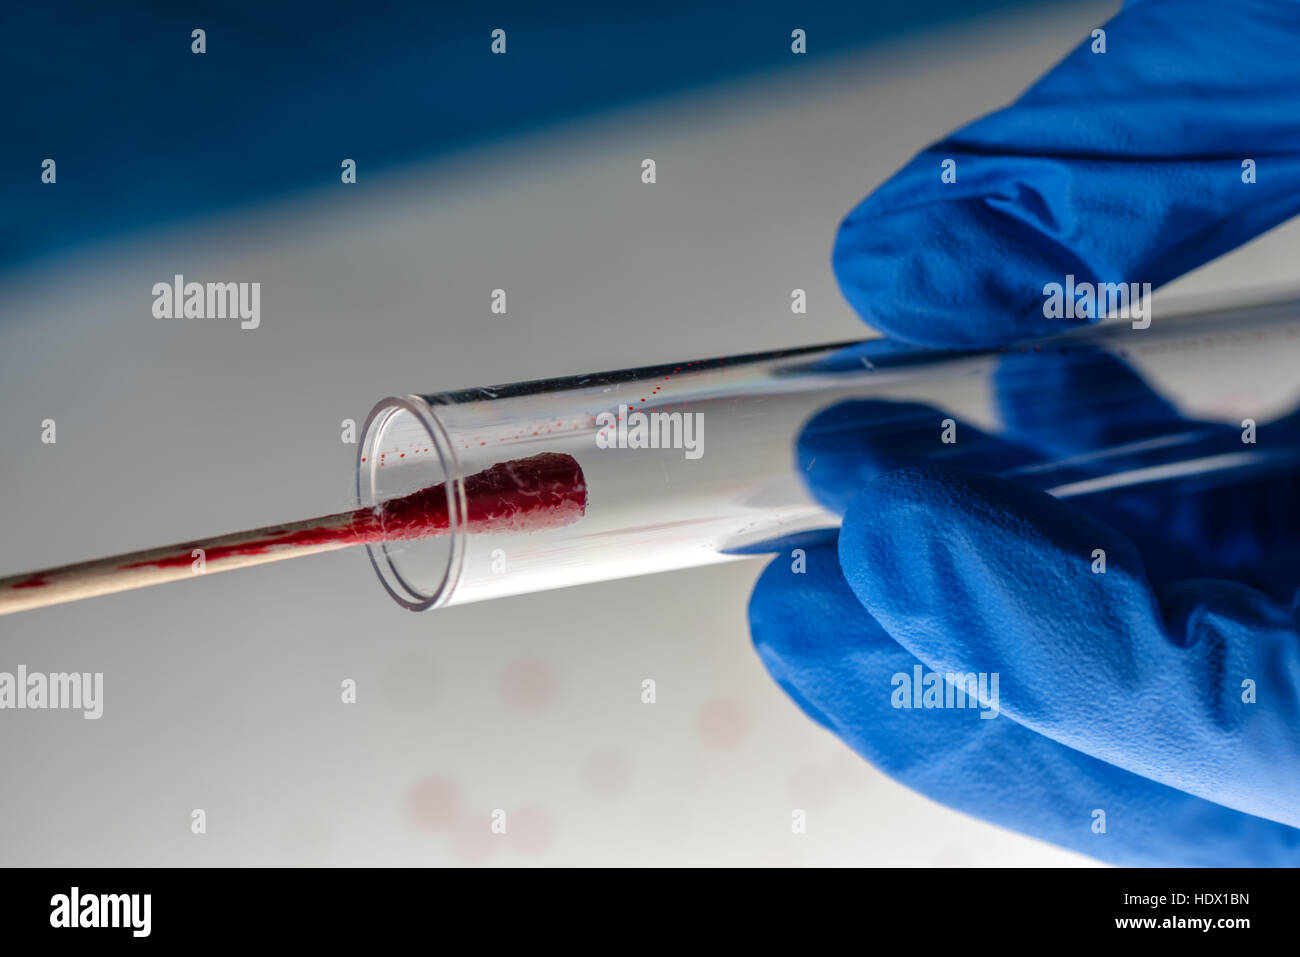 Forensic technician taking DNA sample from blood stain with cotton swab on murder crime scene Stock Photo